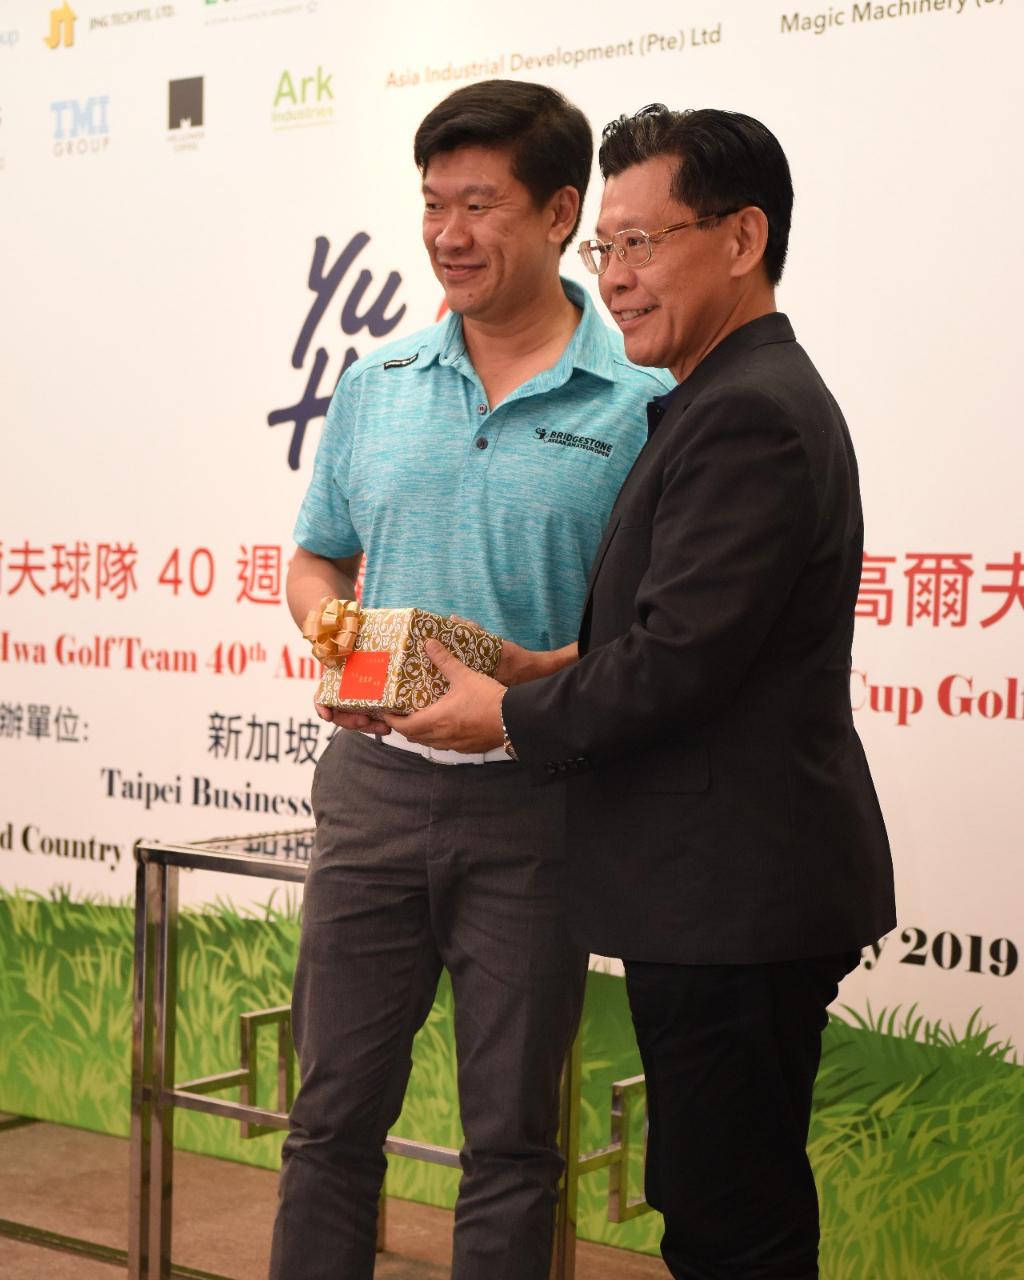 Representative Liang (right) presenting a prize to a lucky draw winner (2019/05/30)

